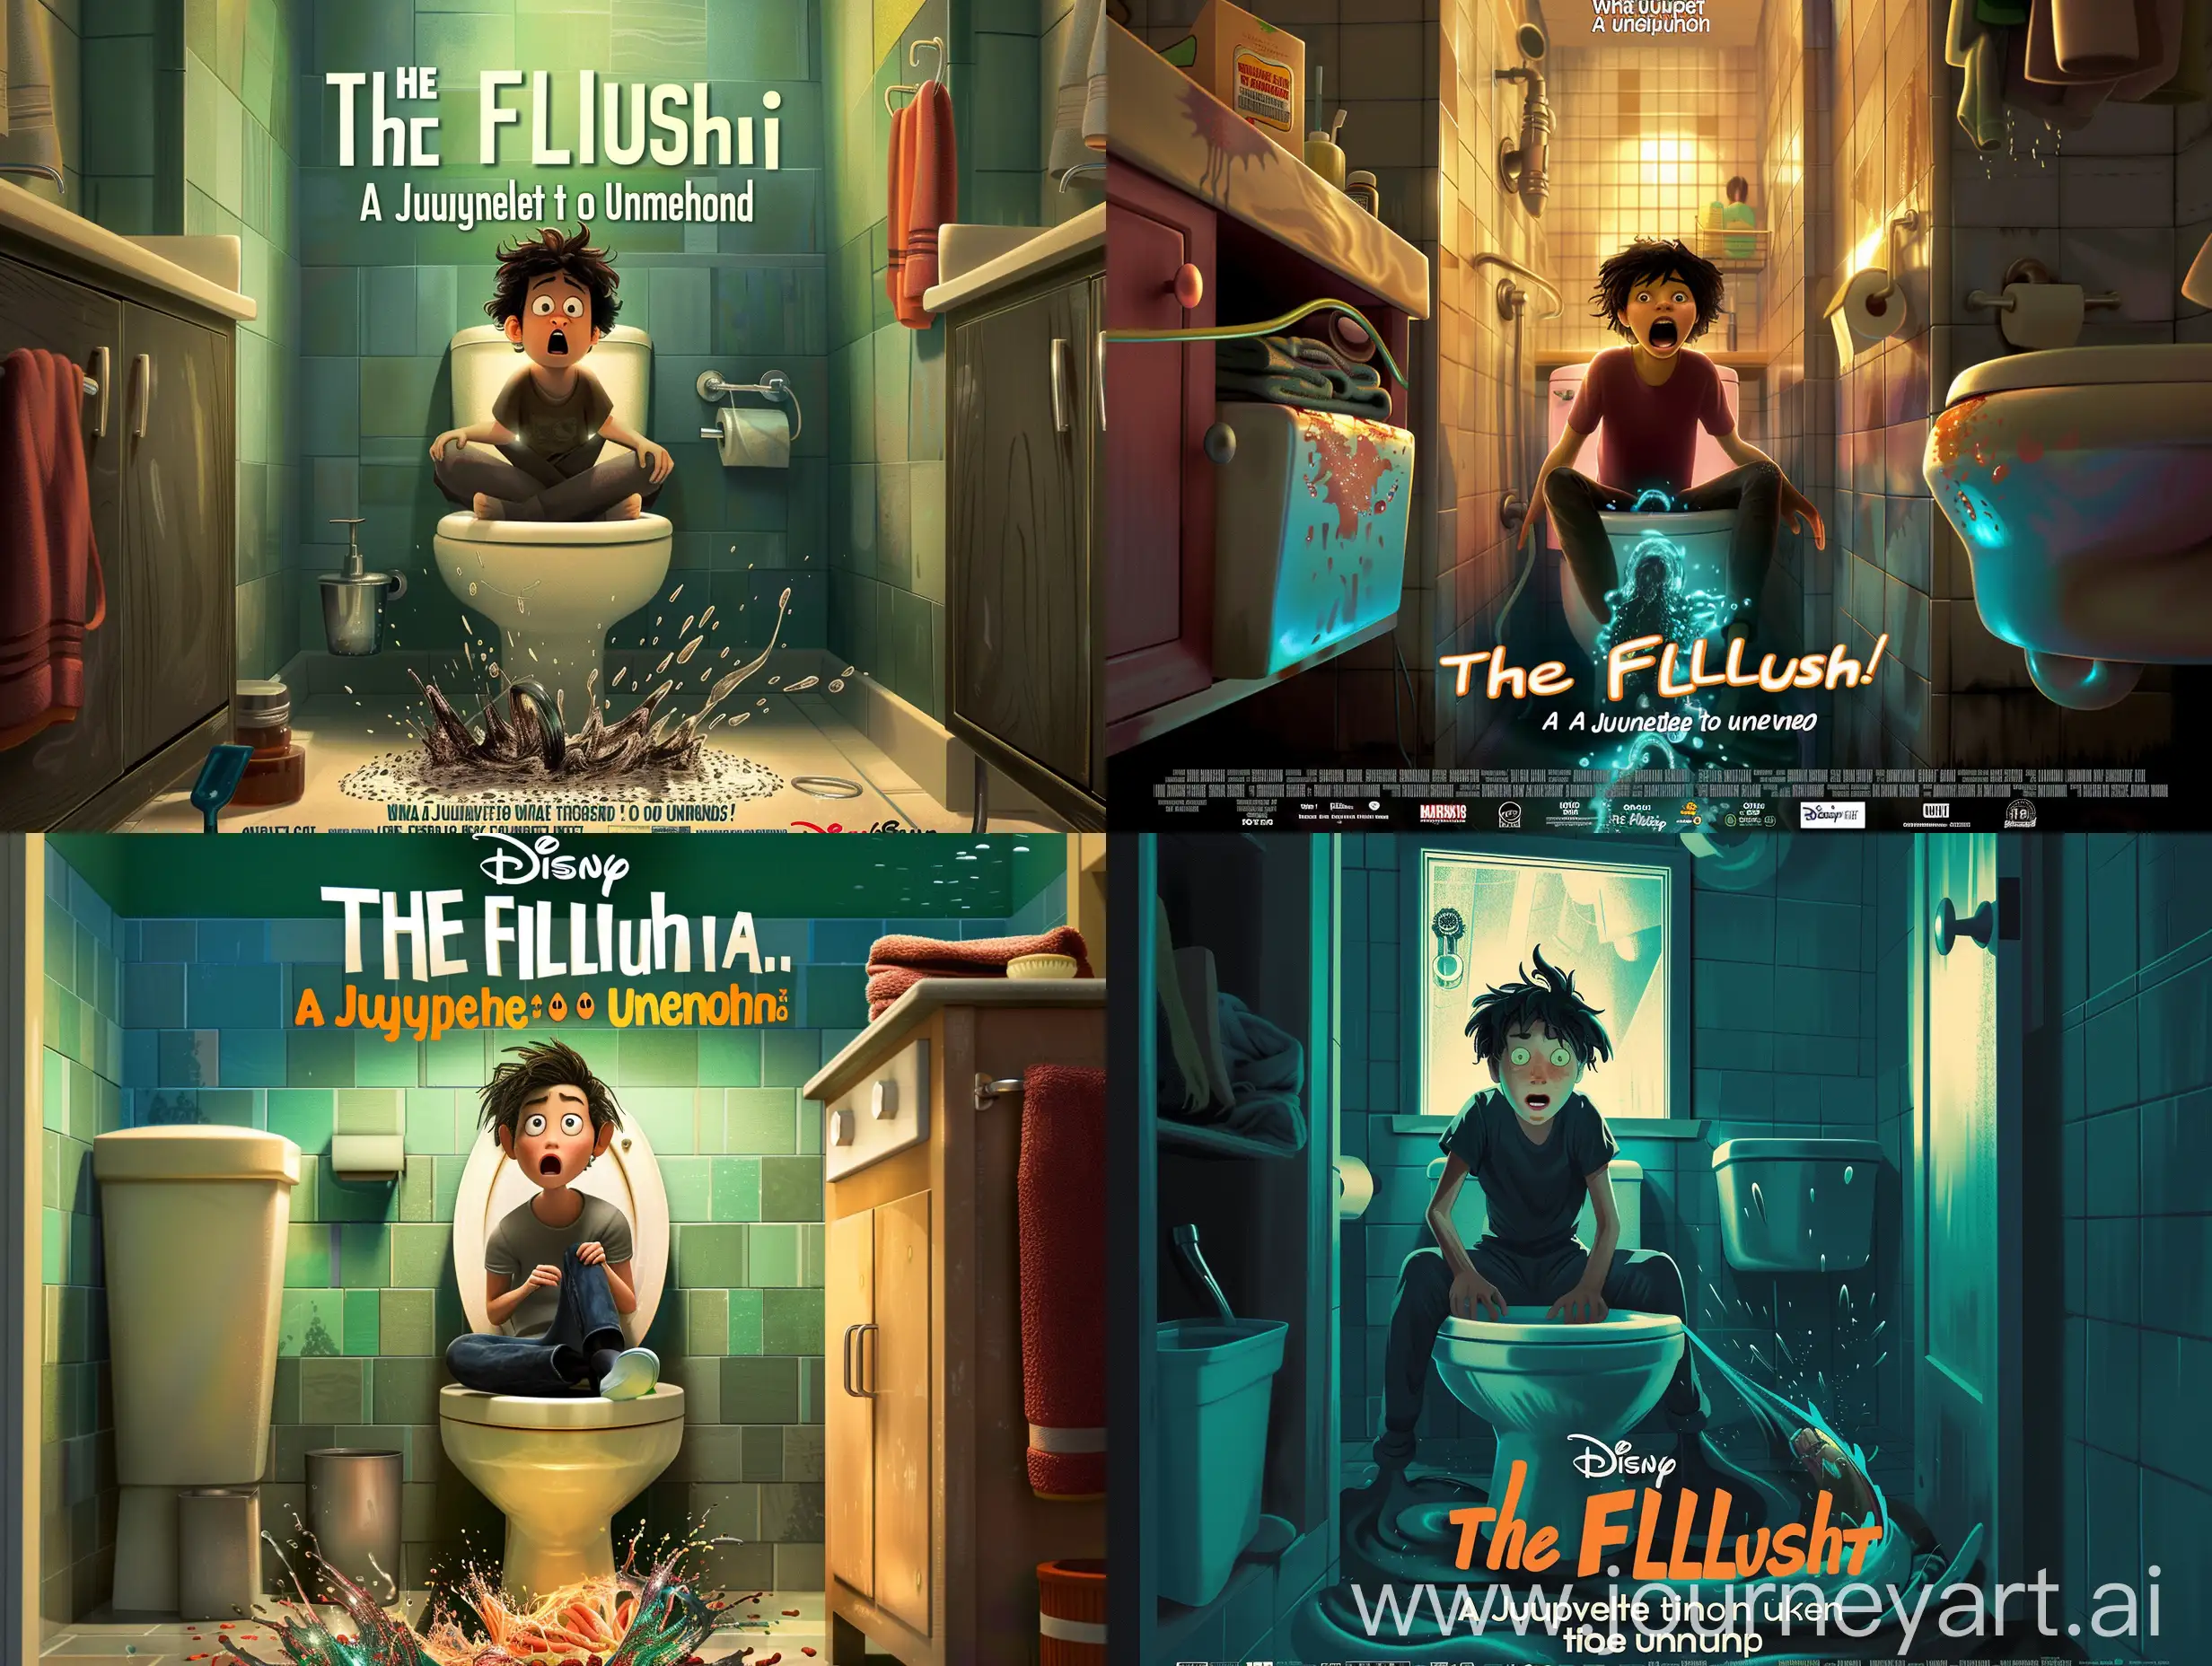 A movie poster in the style of Disney Pixar, featuring a person sitting on a toilet seat in a bathroom. The title is "The Flush: A Journey to the Unknown". The tagline is "What happens when you flush the wrong thing?". The poster shows the person looking shocked and scared, as a mysterious object swirls down the drain. 